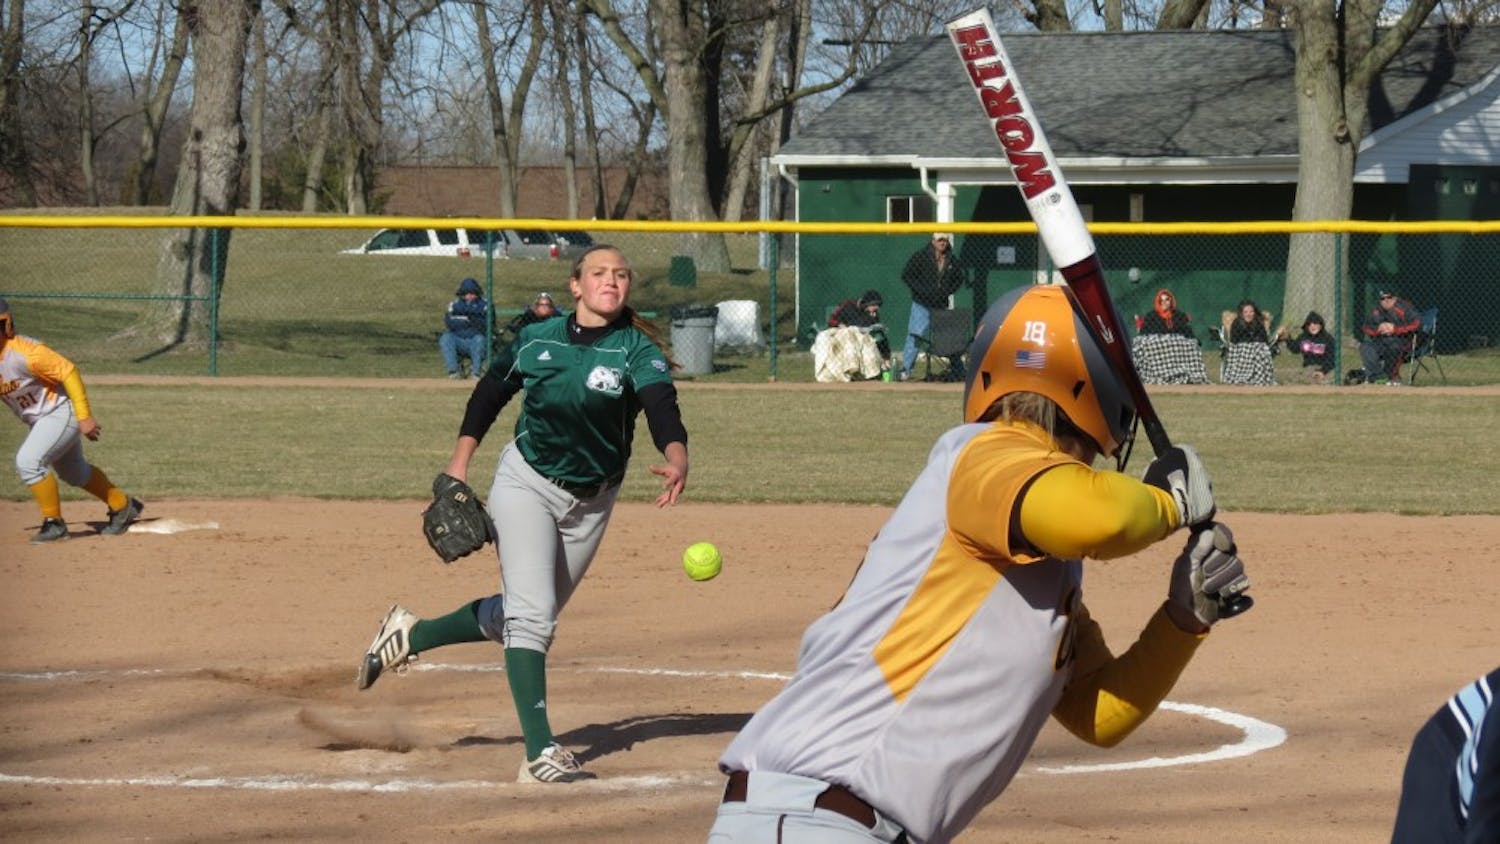 	The EMU softball team beat the Youngstown State University Penguins 5-3 in game one of a doubleheader Tuesday afternoon. The women tied the game in the bottom of the third, but a three-run double in the next inning and another run in the fifth brought the Eagles ahead.